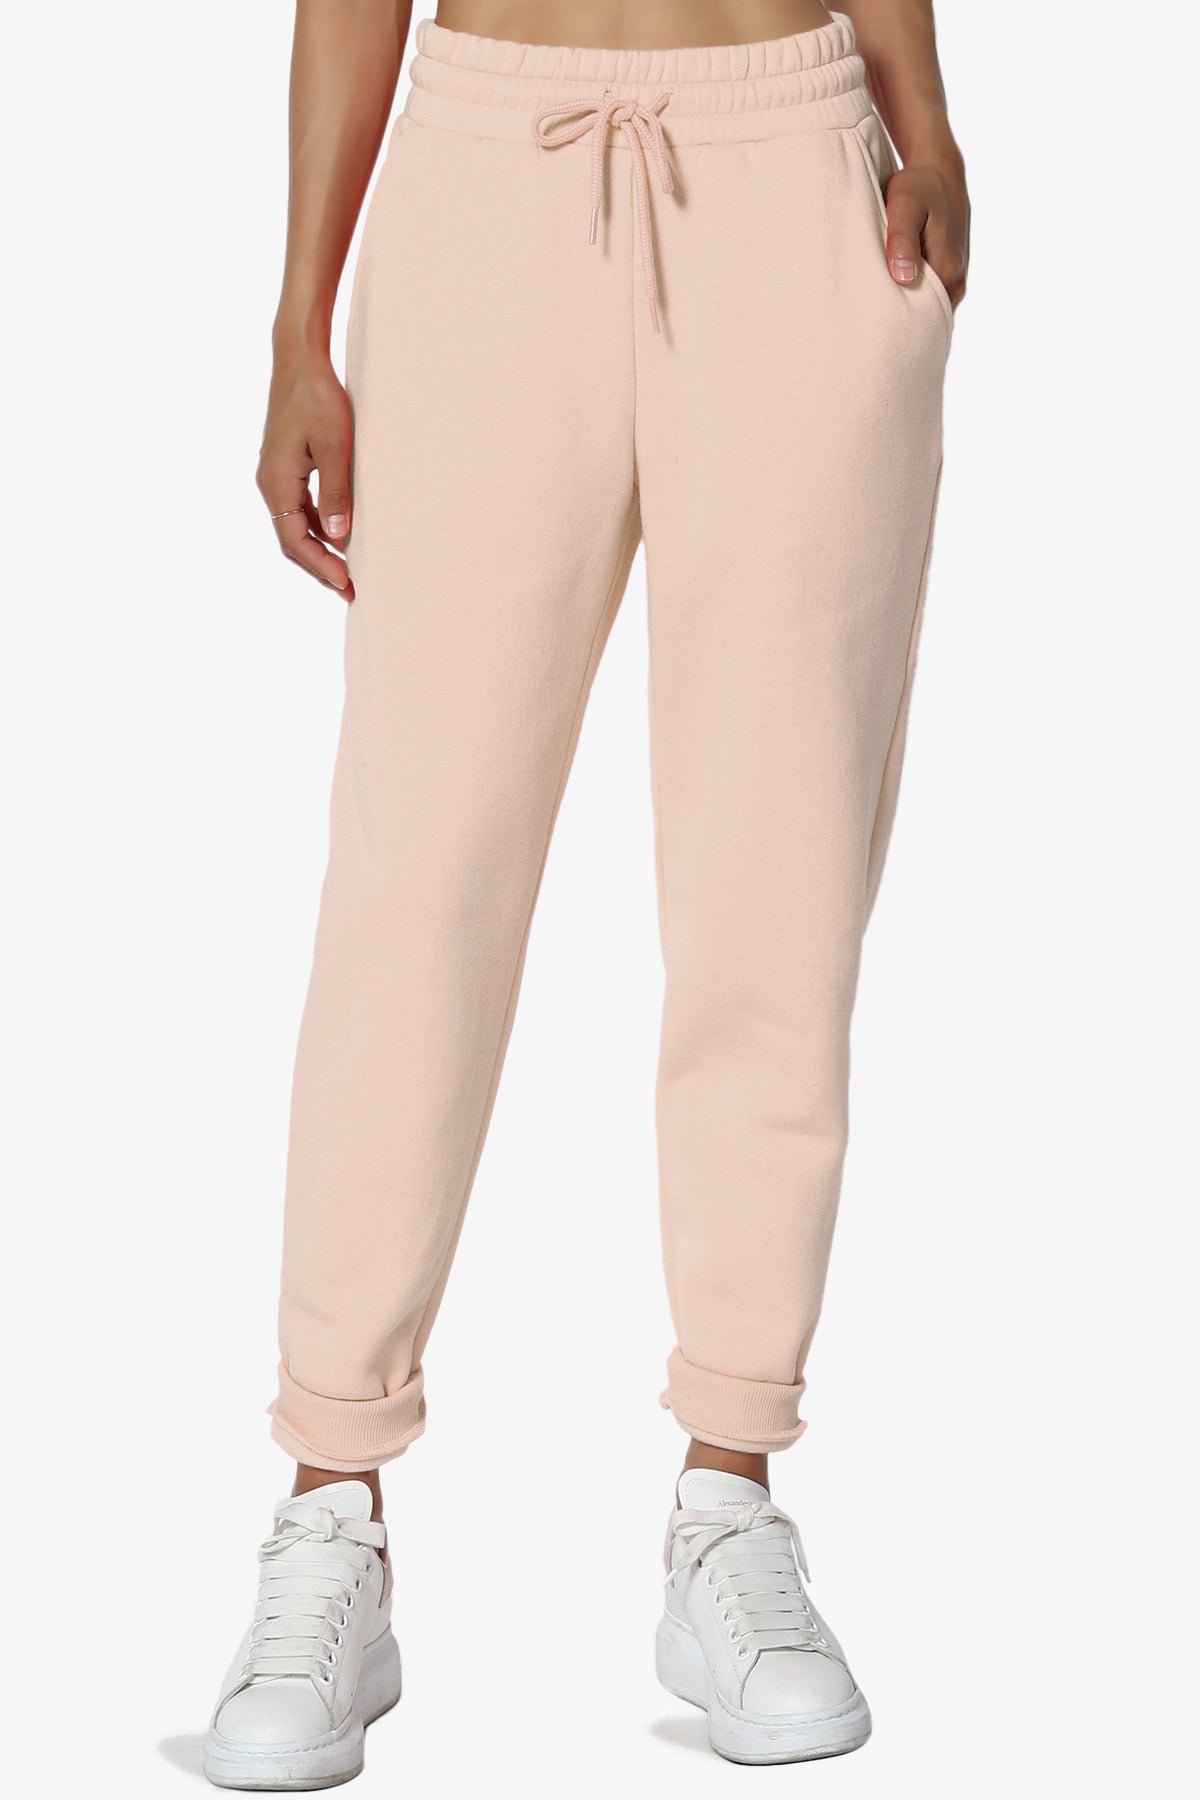  IMUZYN Joggers for Women Active Sweatpants with